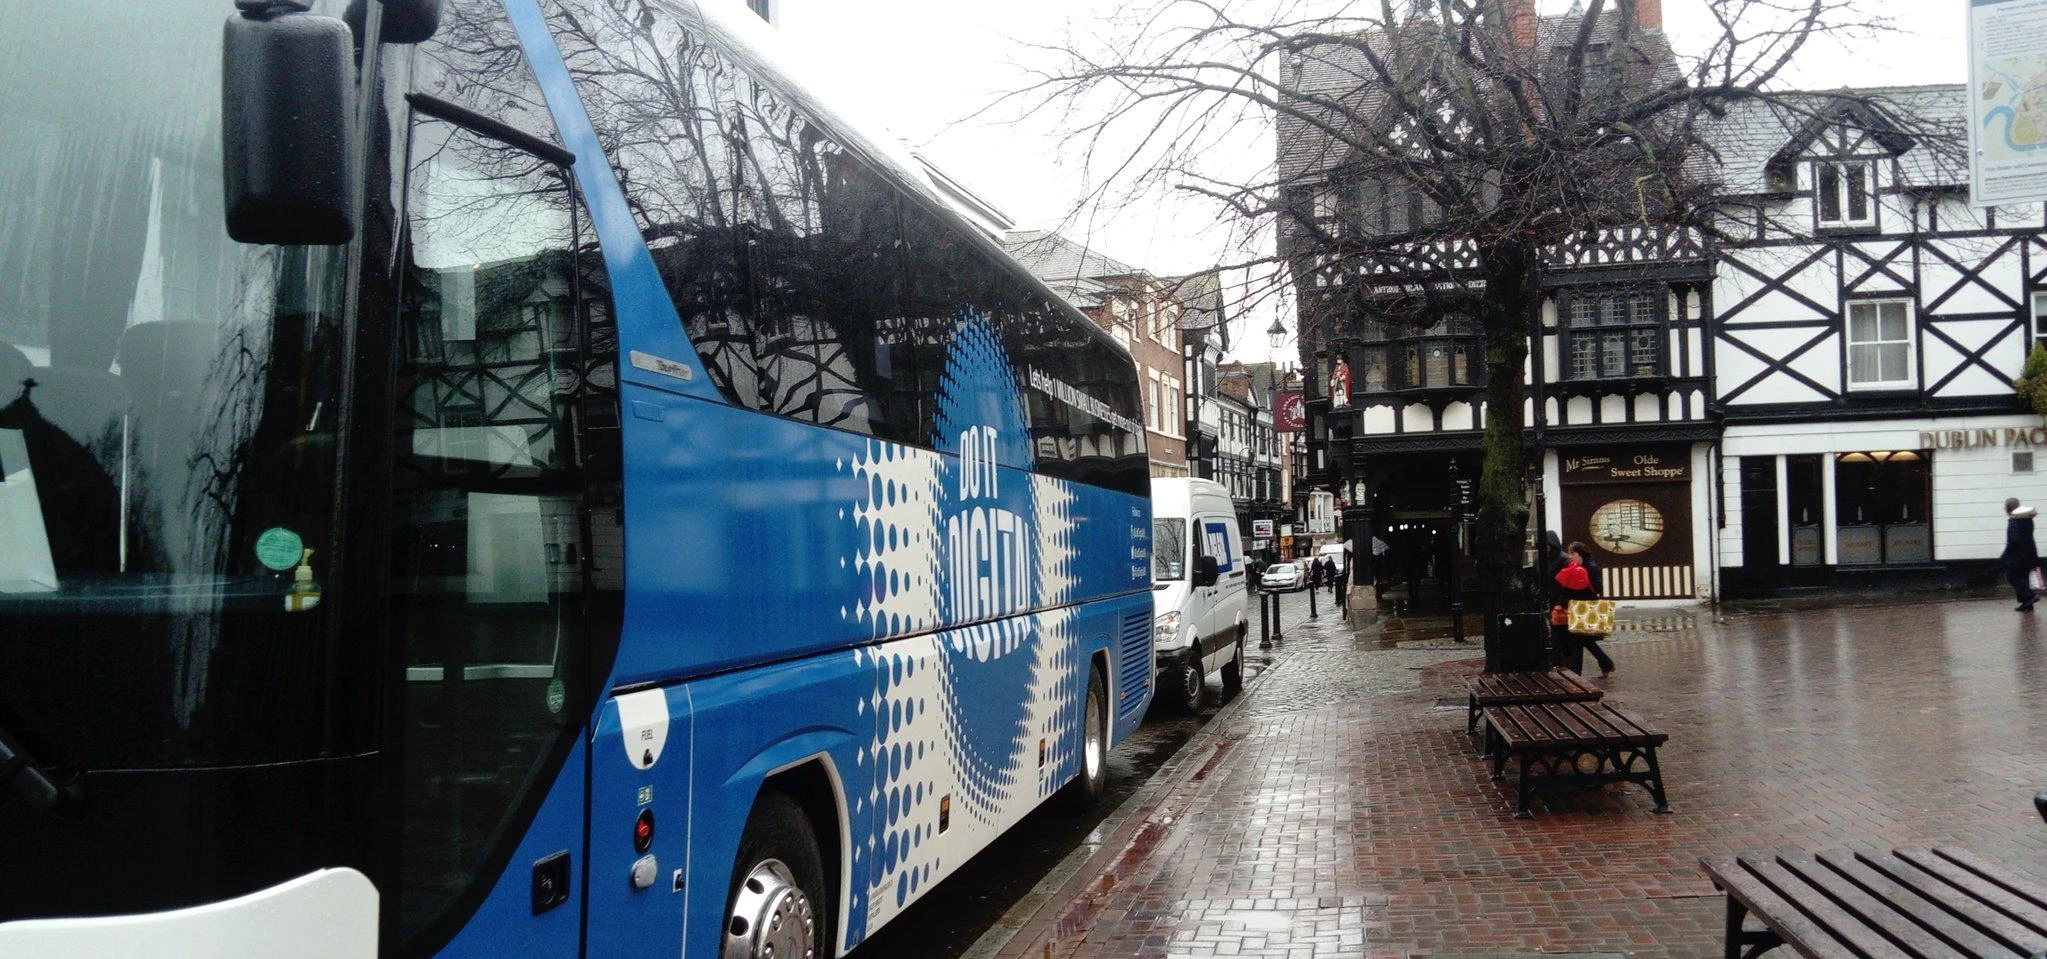 The Do It Digital campaign bus in Chester